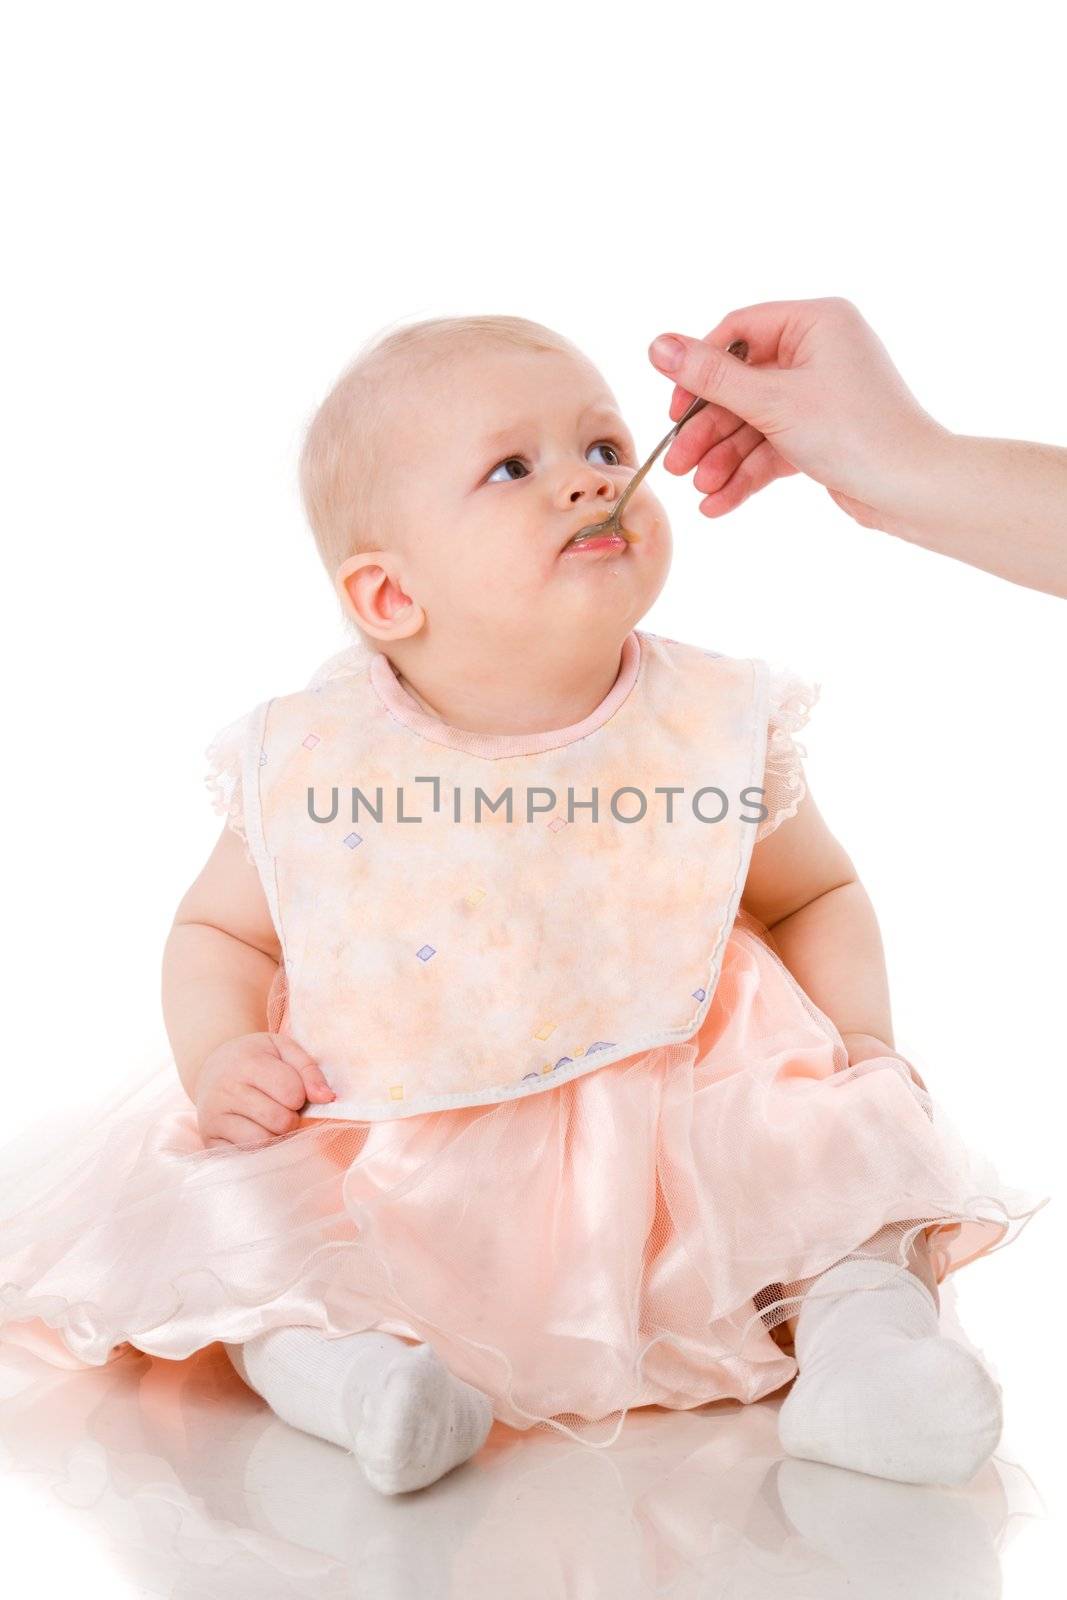 Baby eating from spoon in mother's hand isolated on white